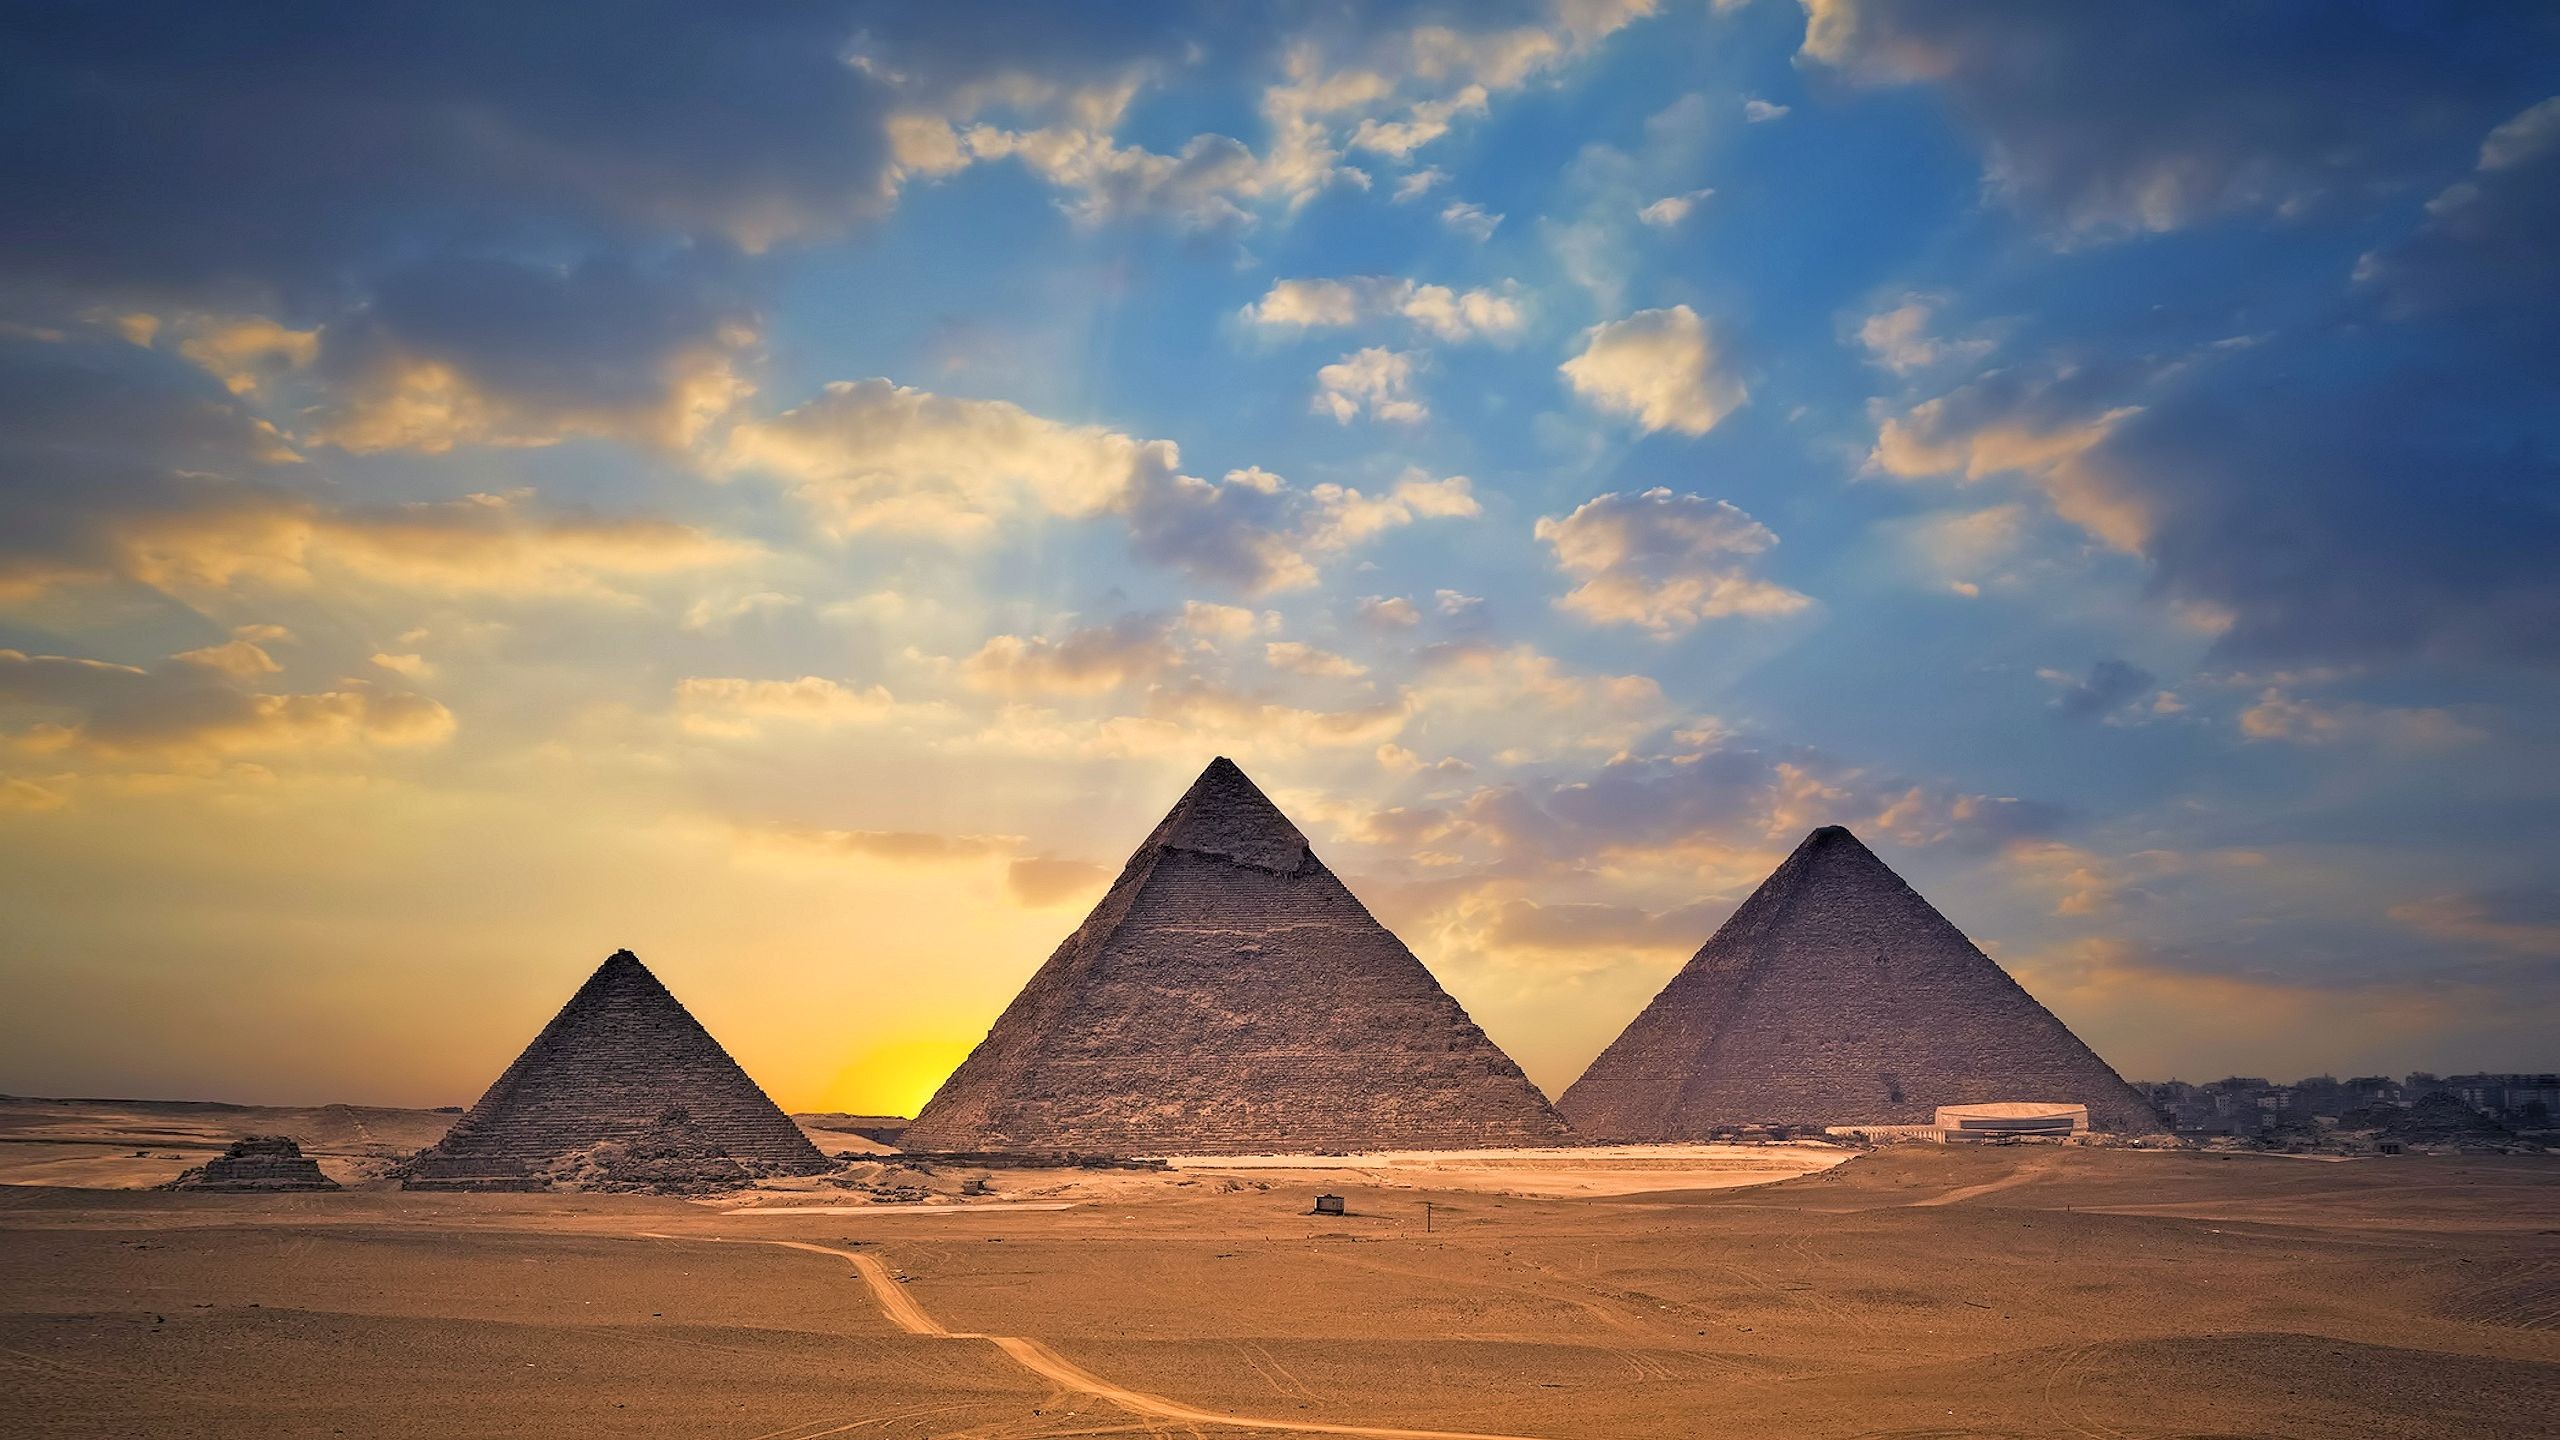 General 2560x1440 Egypt pyramid desert old building ancient landscape Pyramids of Giza history clouds